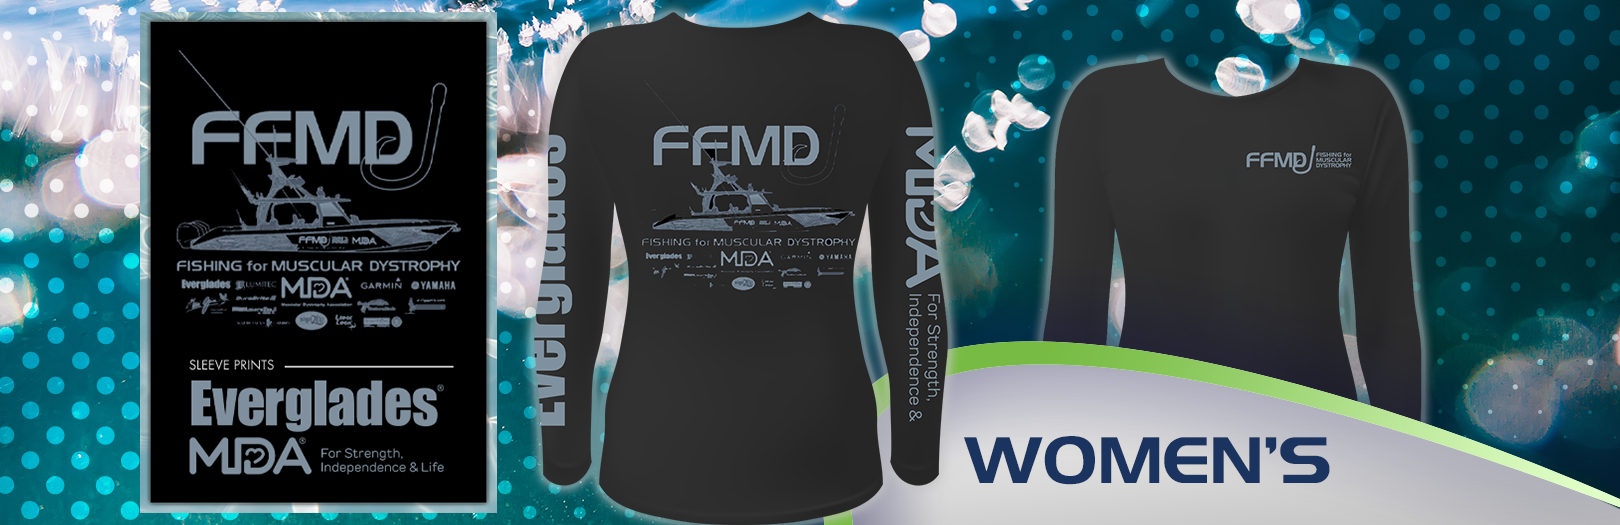 Women's Long Sleeve FFMD Boat Performance Shirt (Dri-Fit)- Black – Fishing  for MD - Muscular Dystrophy